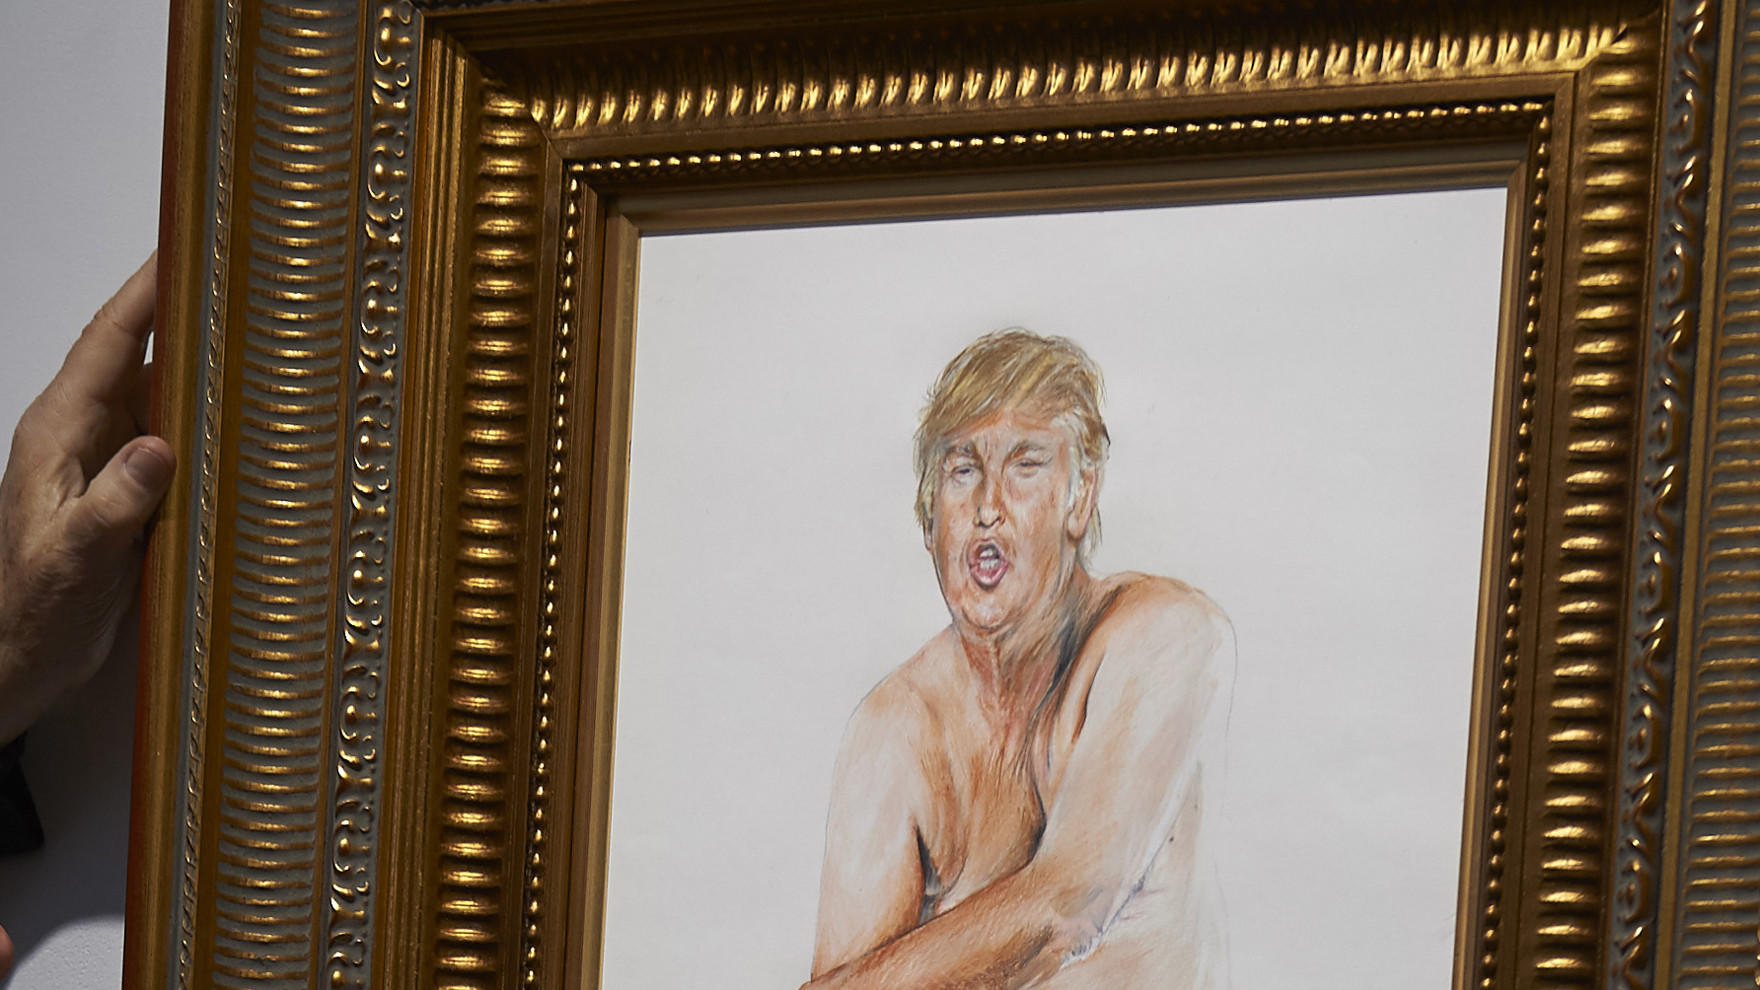 A curator adjusts a painting of Donald Trump by Illma Gore at an exhibition in London.